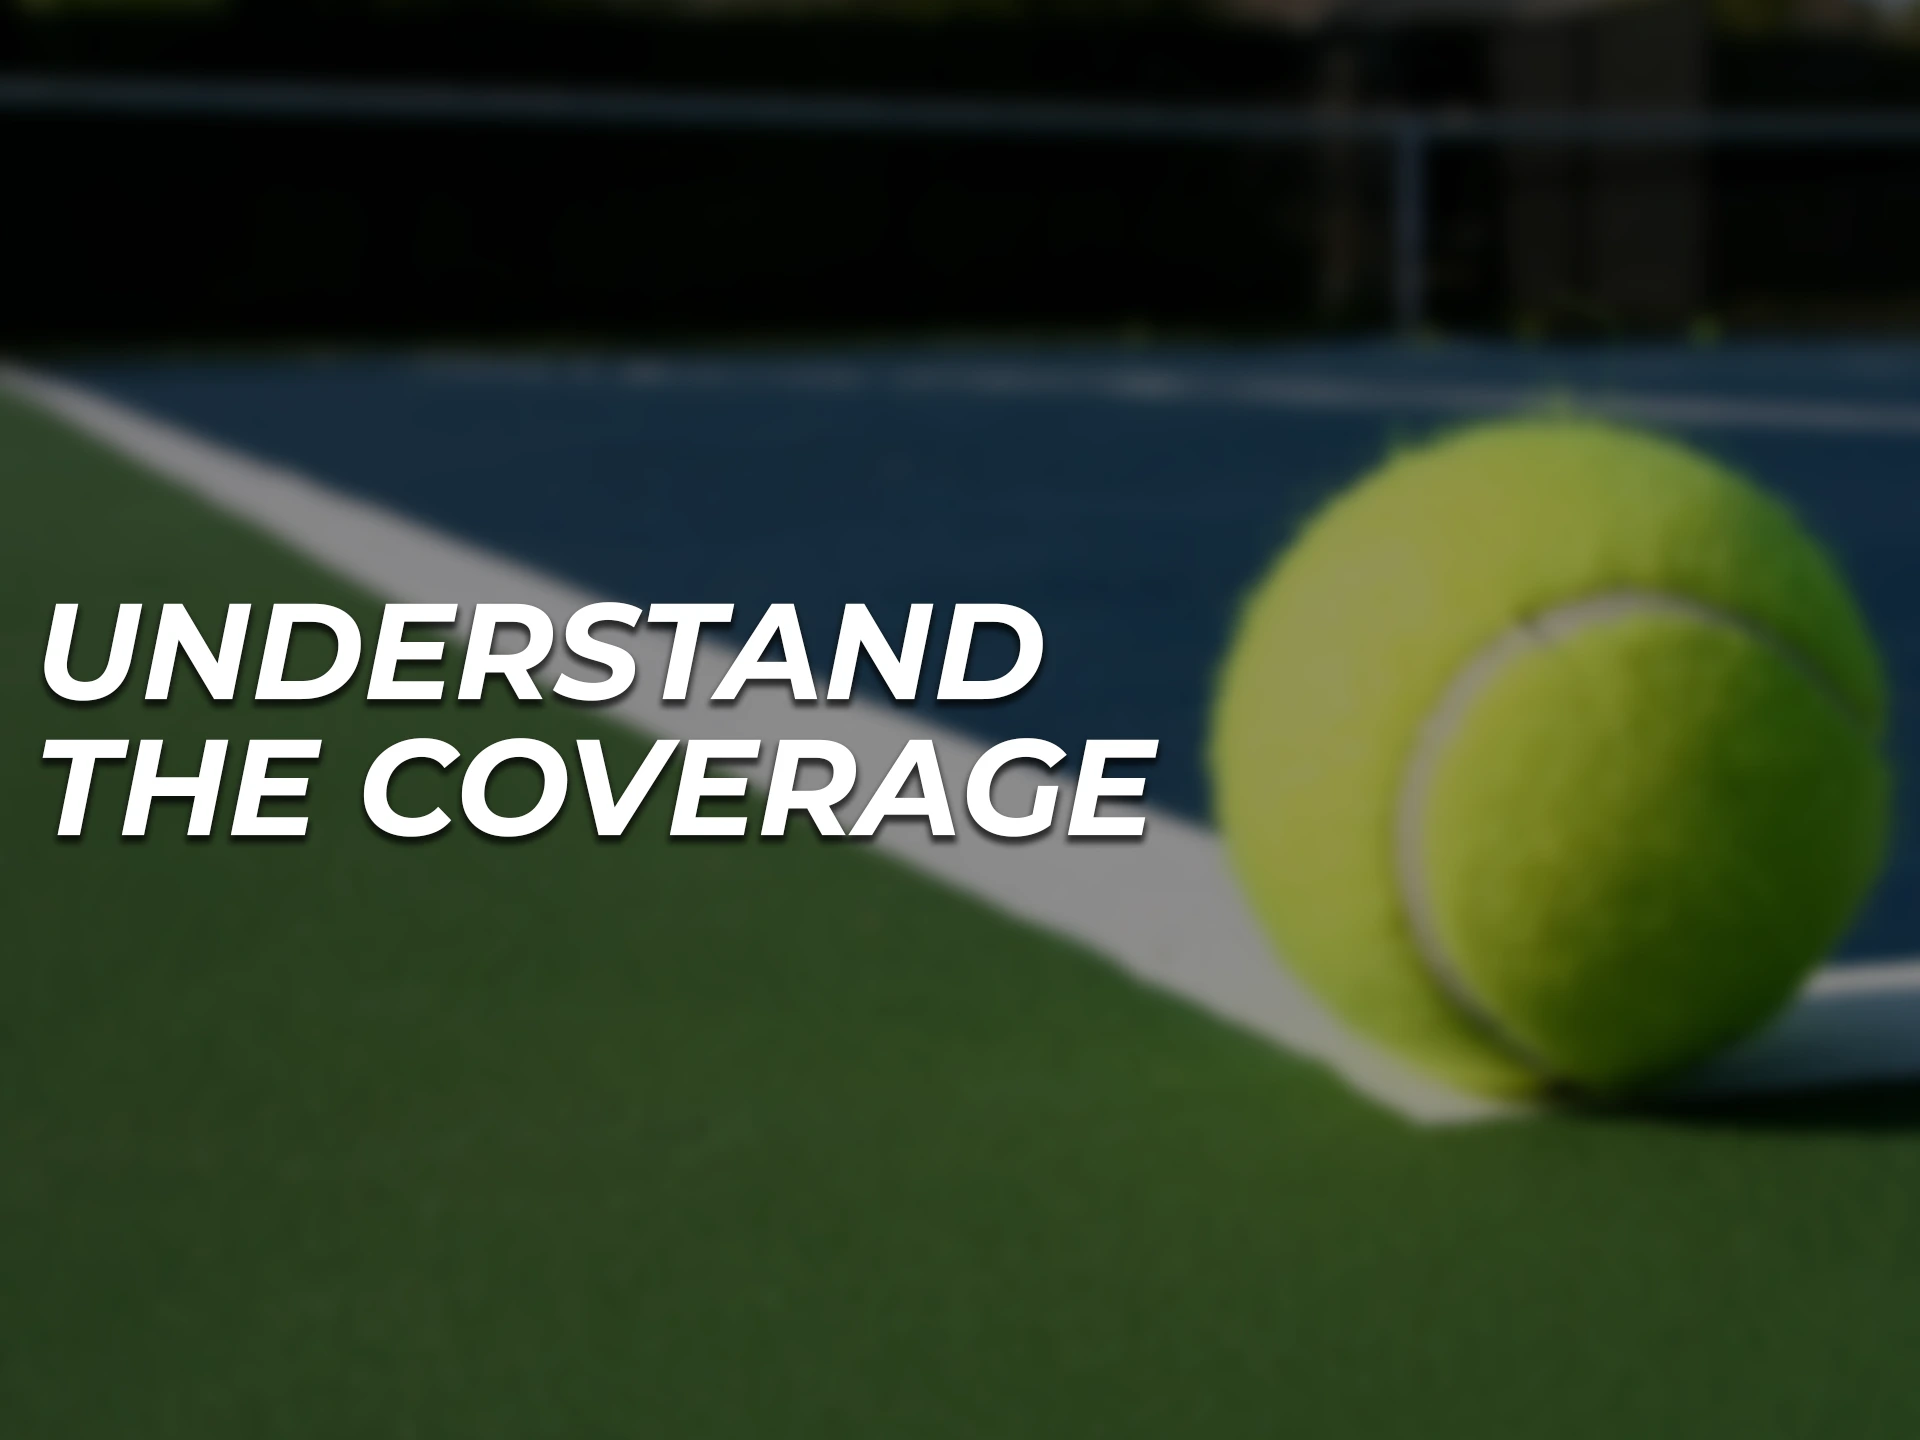 The tennis coverage can make a big difference in the outcome of a game.